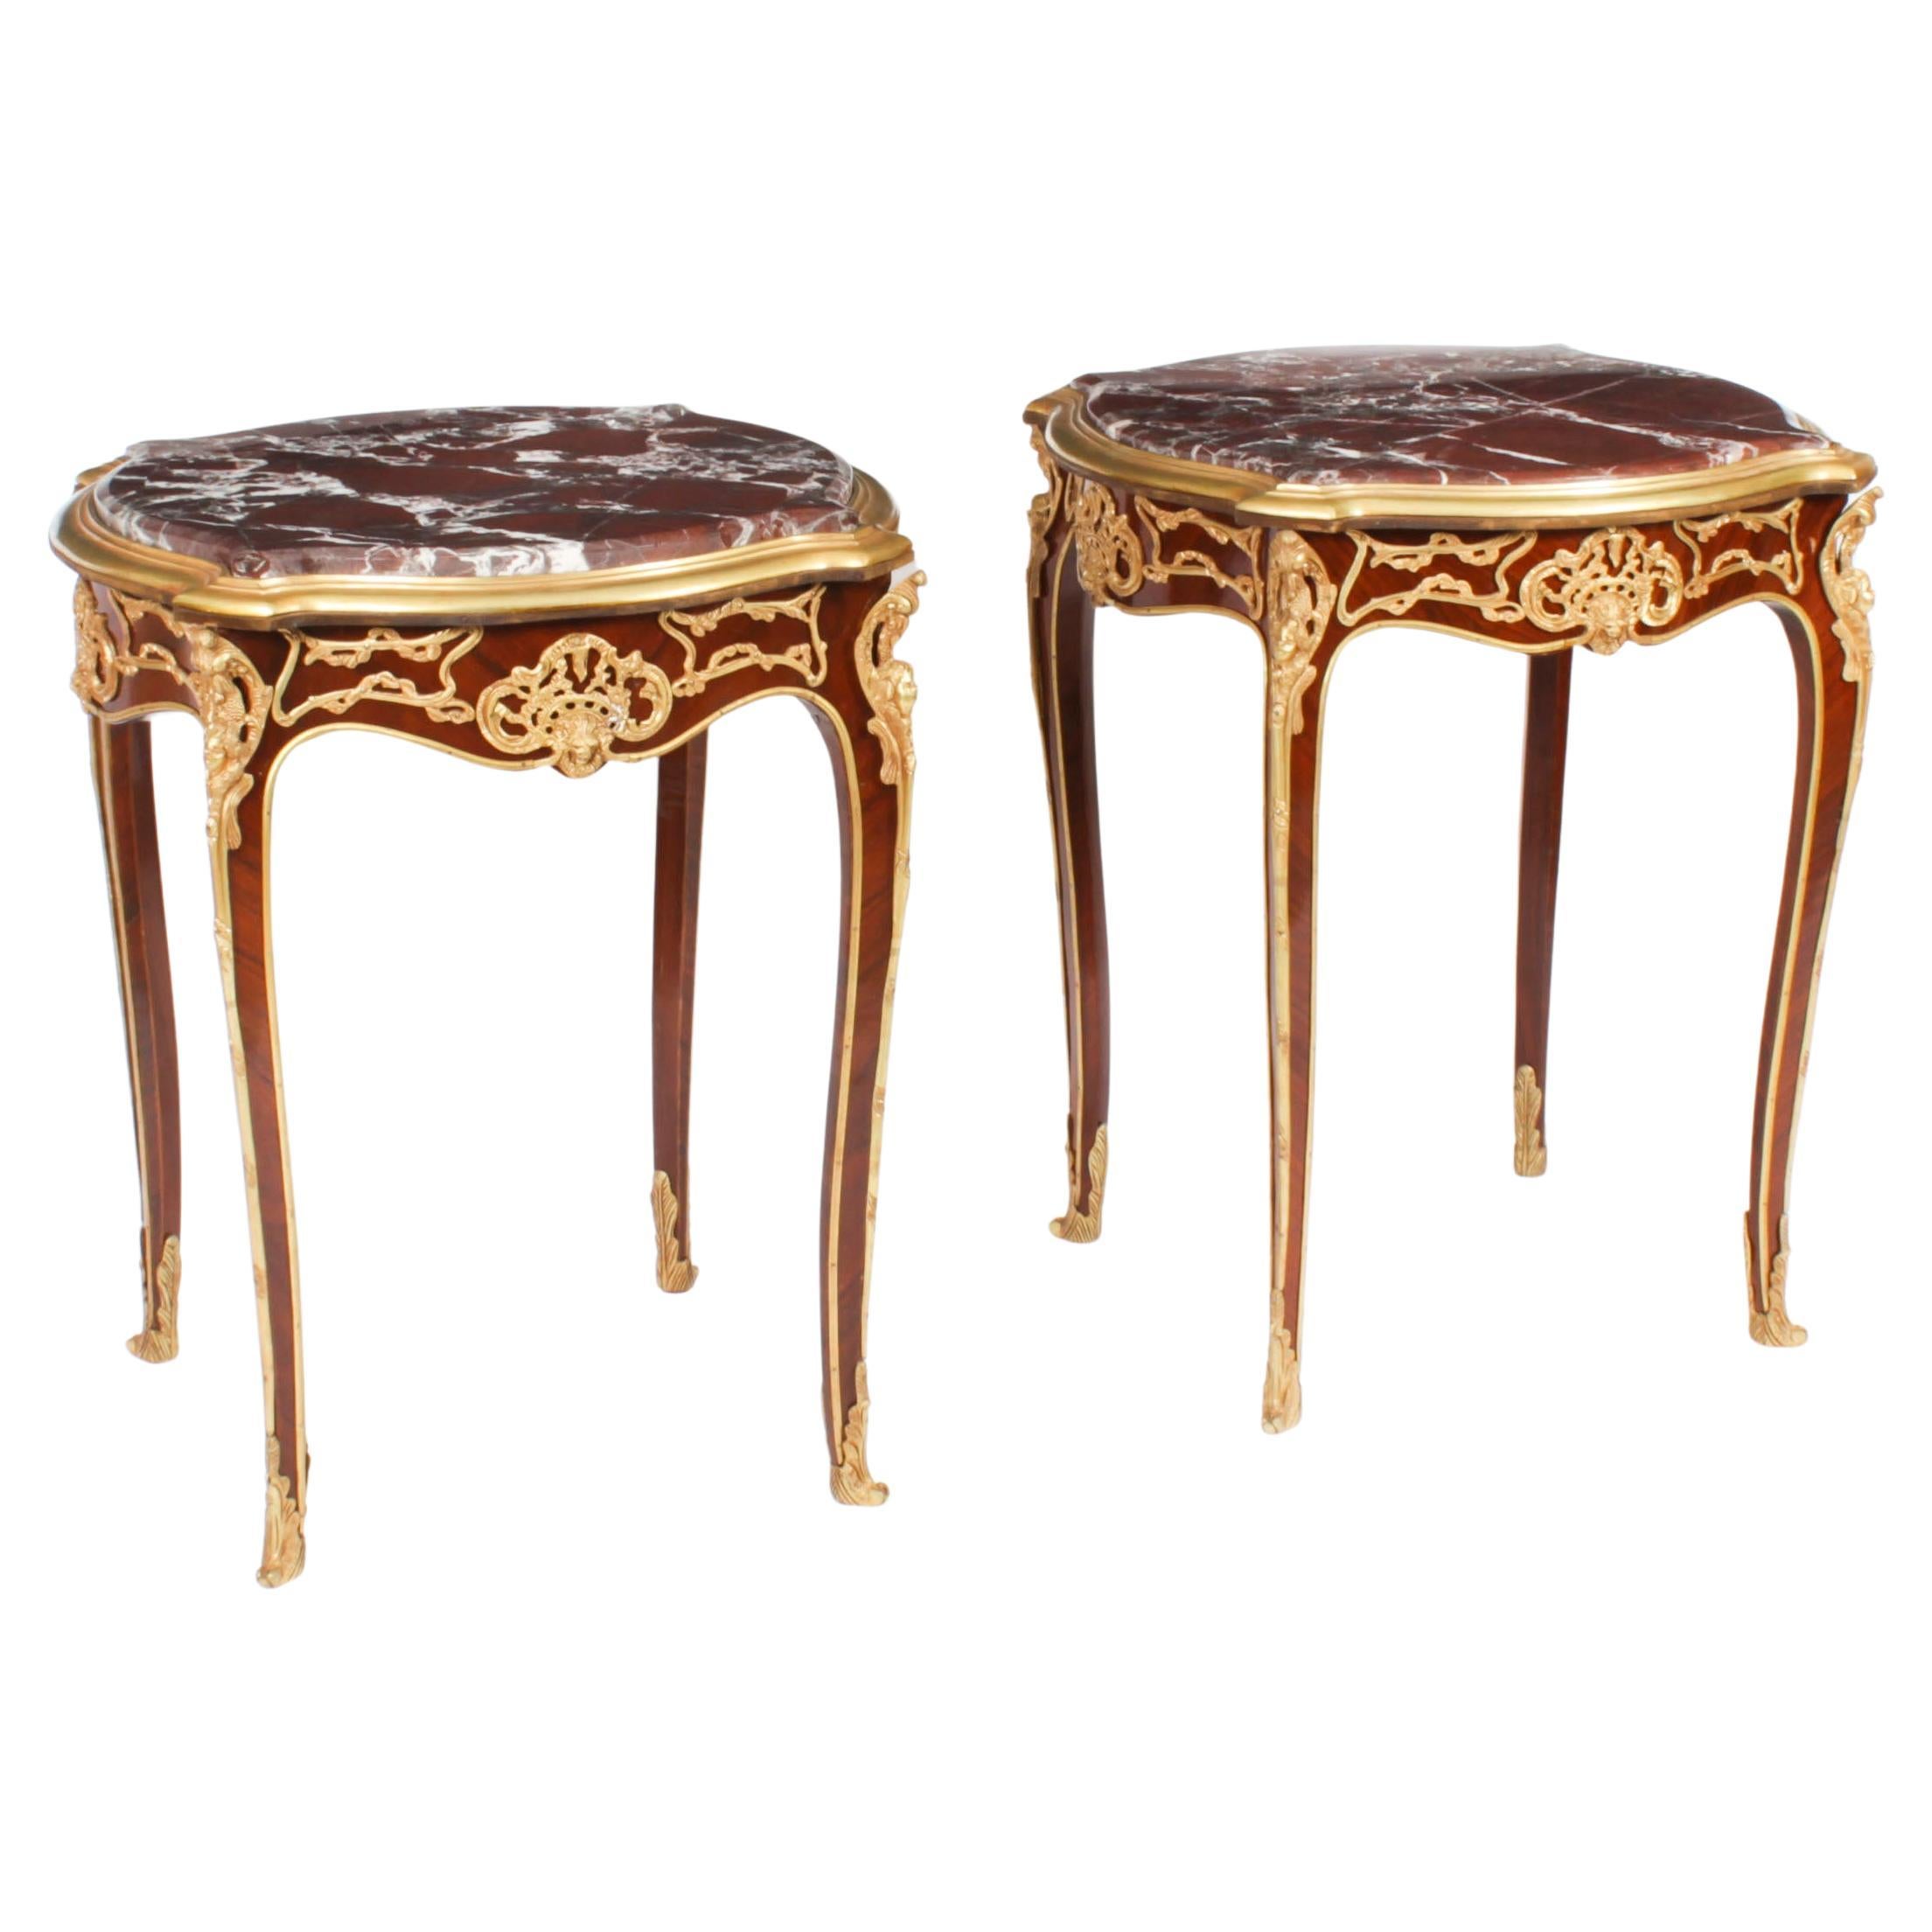 Vintage Pair French Louis Revival Marble & Ormolu Occasional Tables 20th C